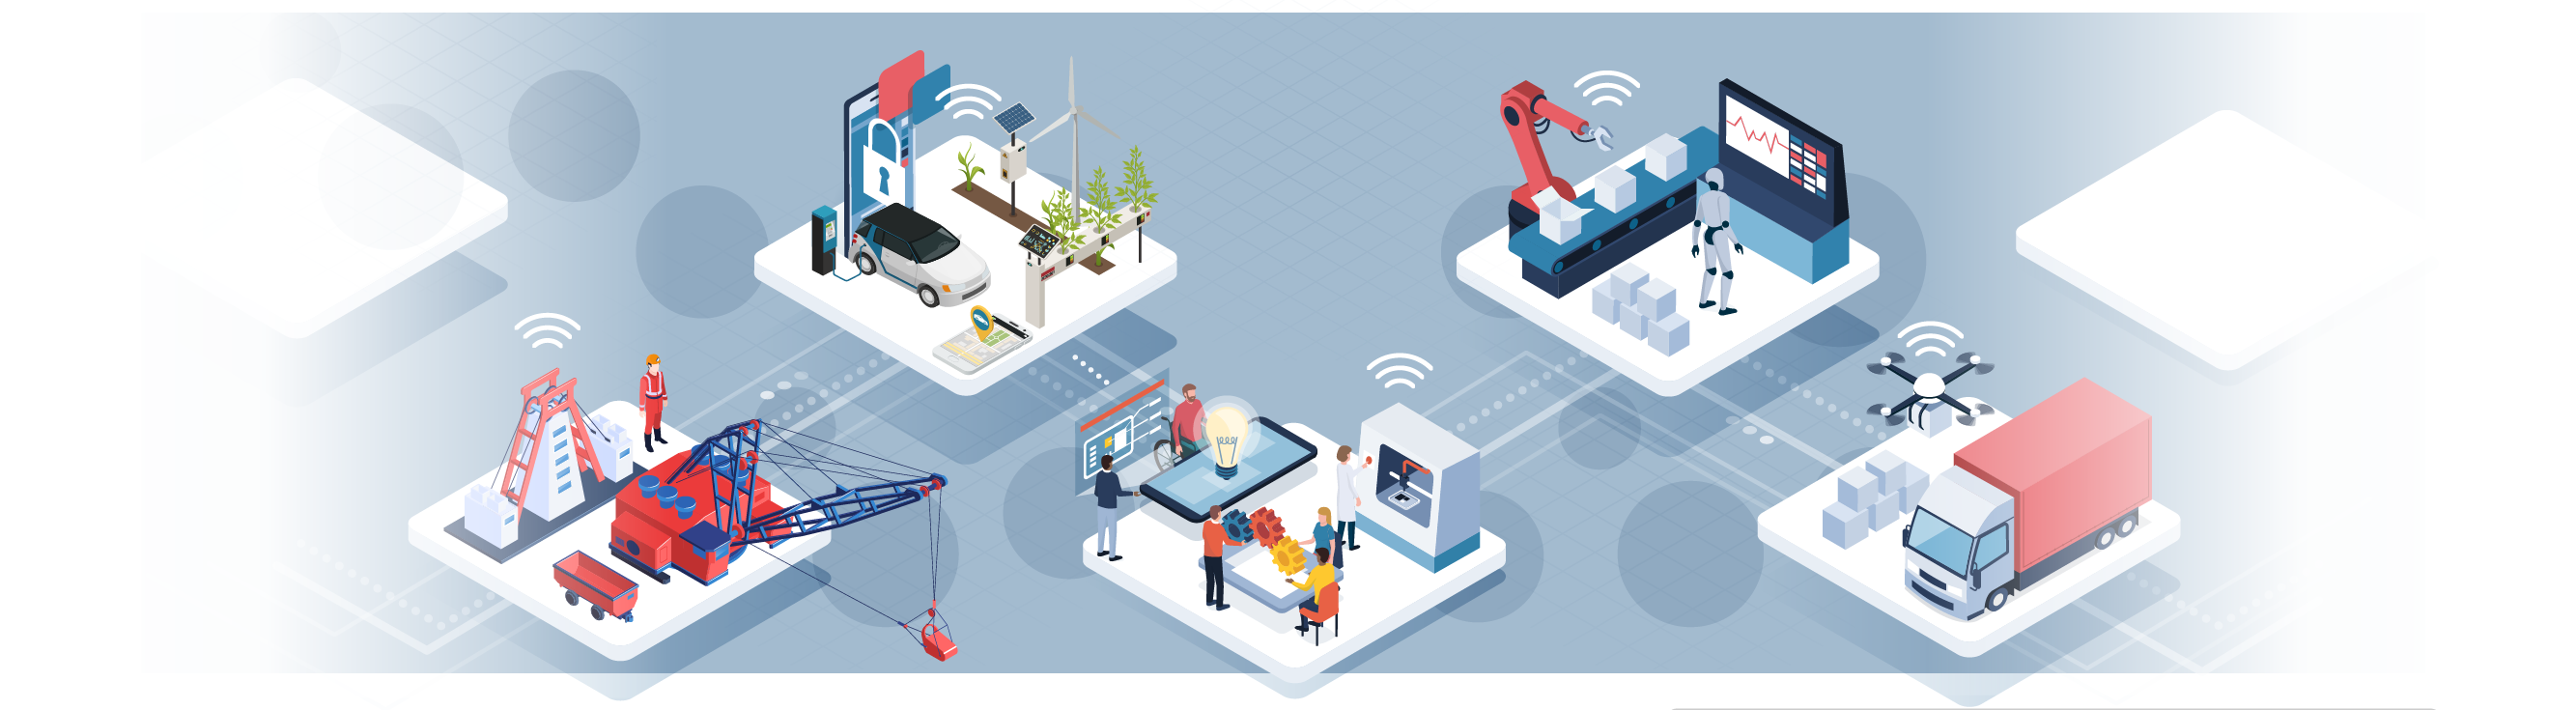 Images representing five examples of network application: 1. Heavy machinery work site, 2. Electric vehicle charging stations, 3. Laboratory, 4. Robot operated factory, 5. Drone assisted transport and delivery system